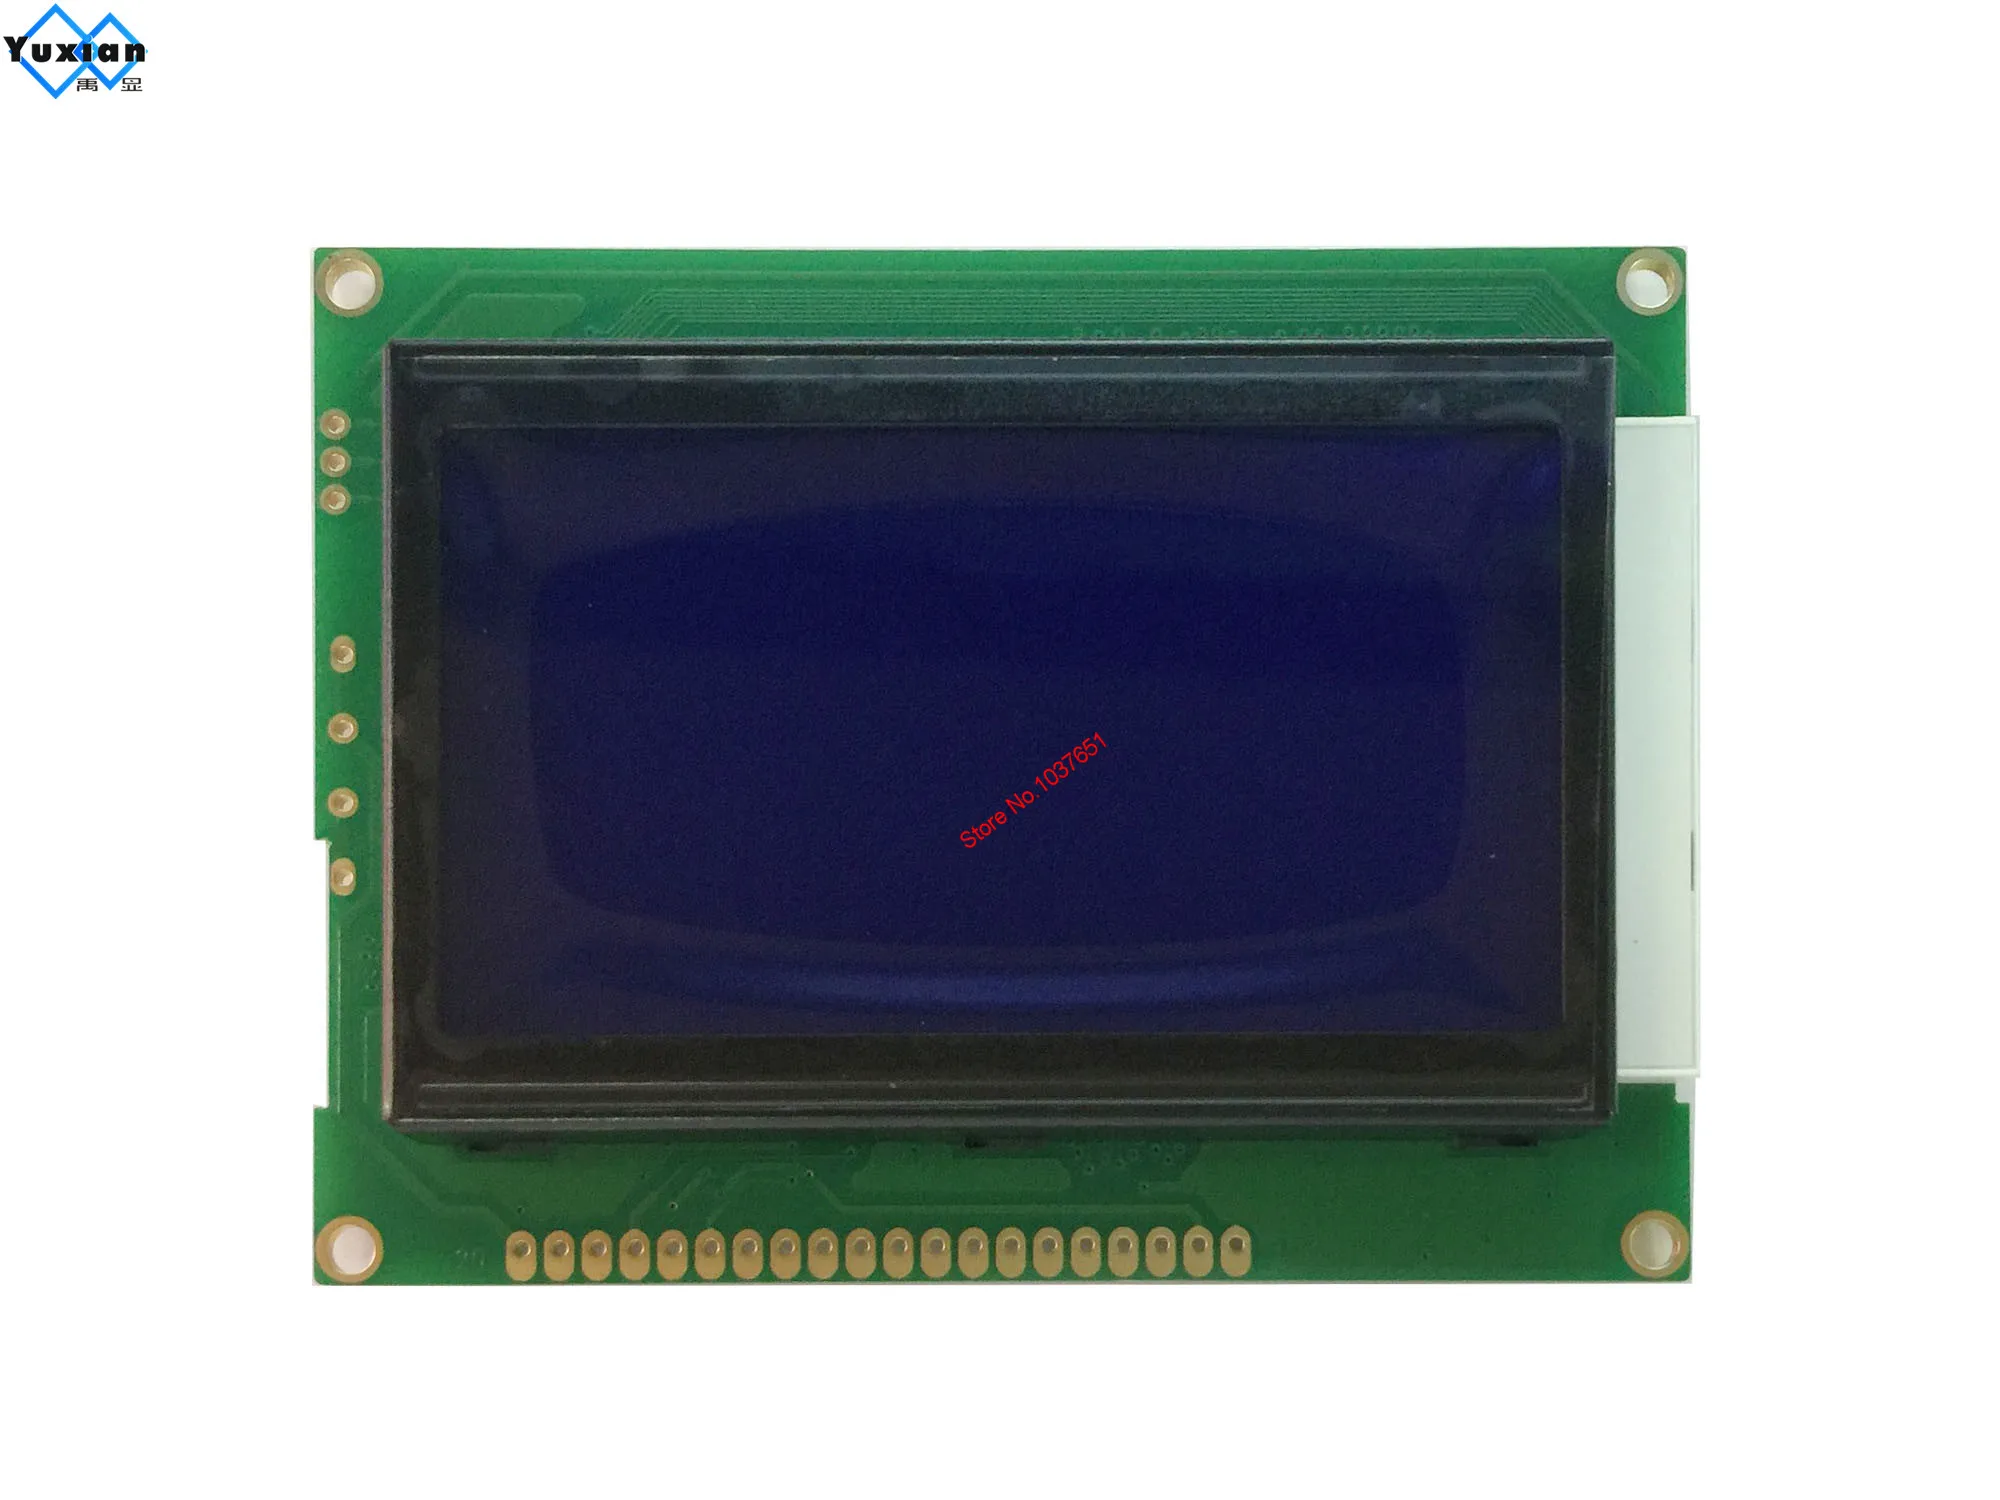 1.0 128128 128*128 Round Graphic Serial SPI COG Matrix LCD Module Display  Screen build-in IST7920 Controller - AliExpress